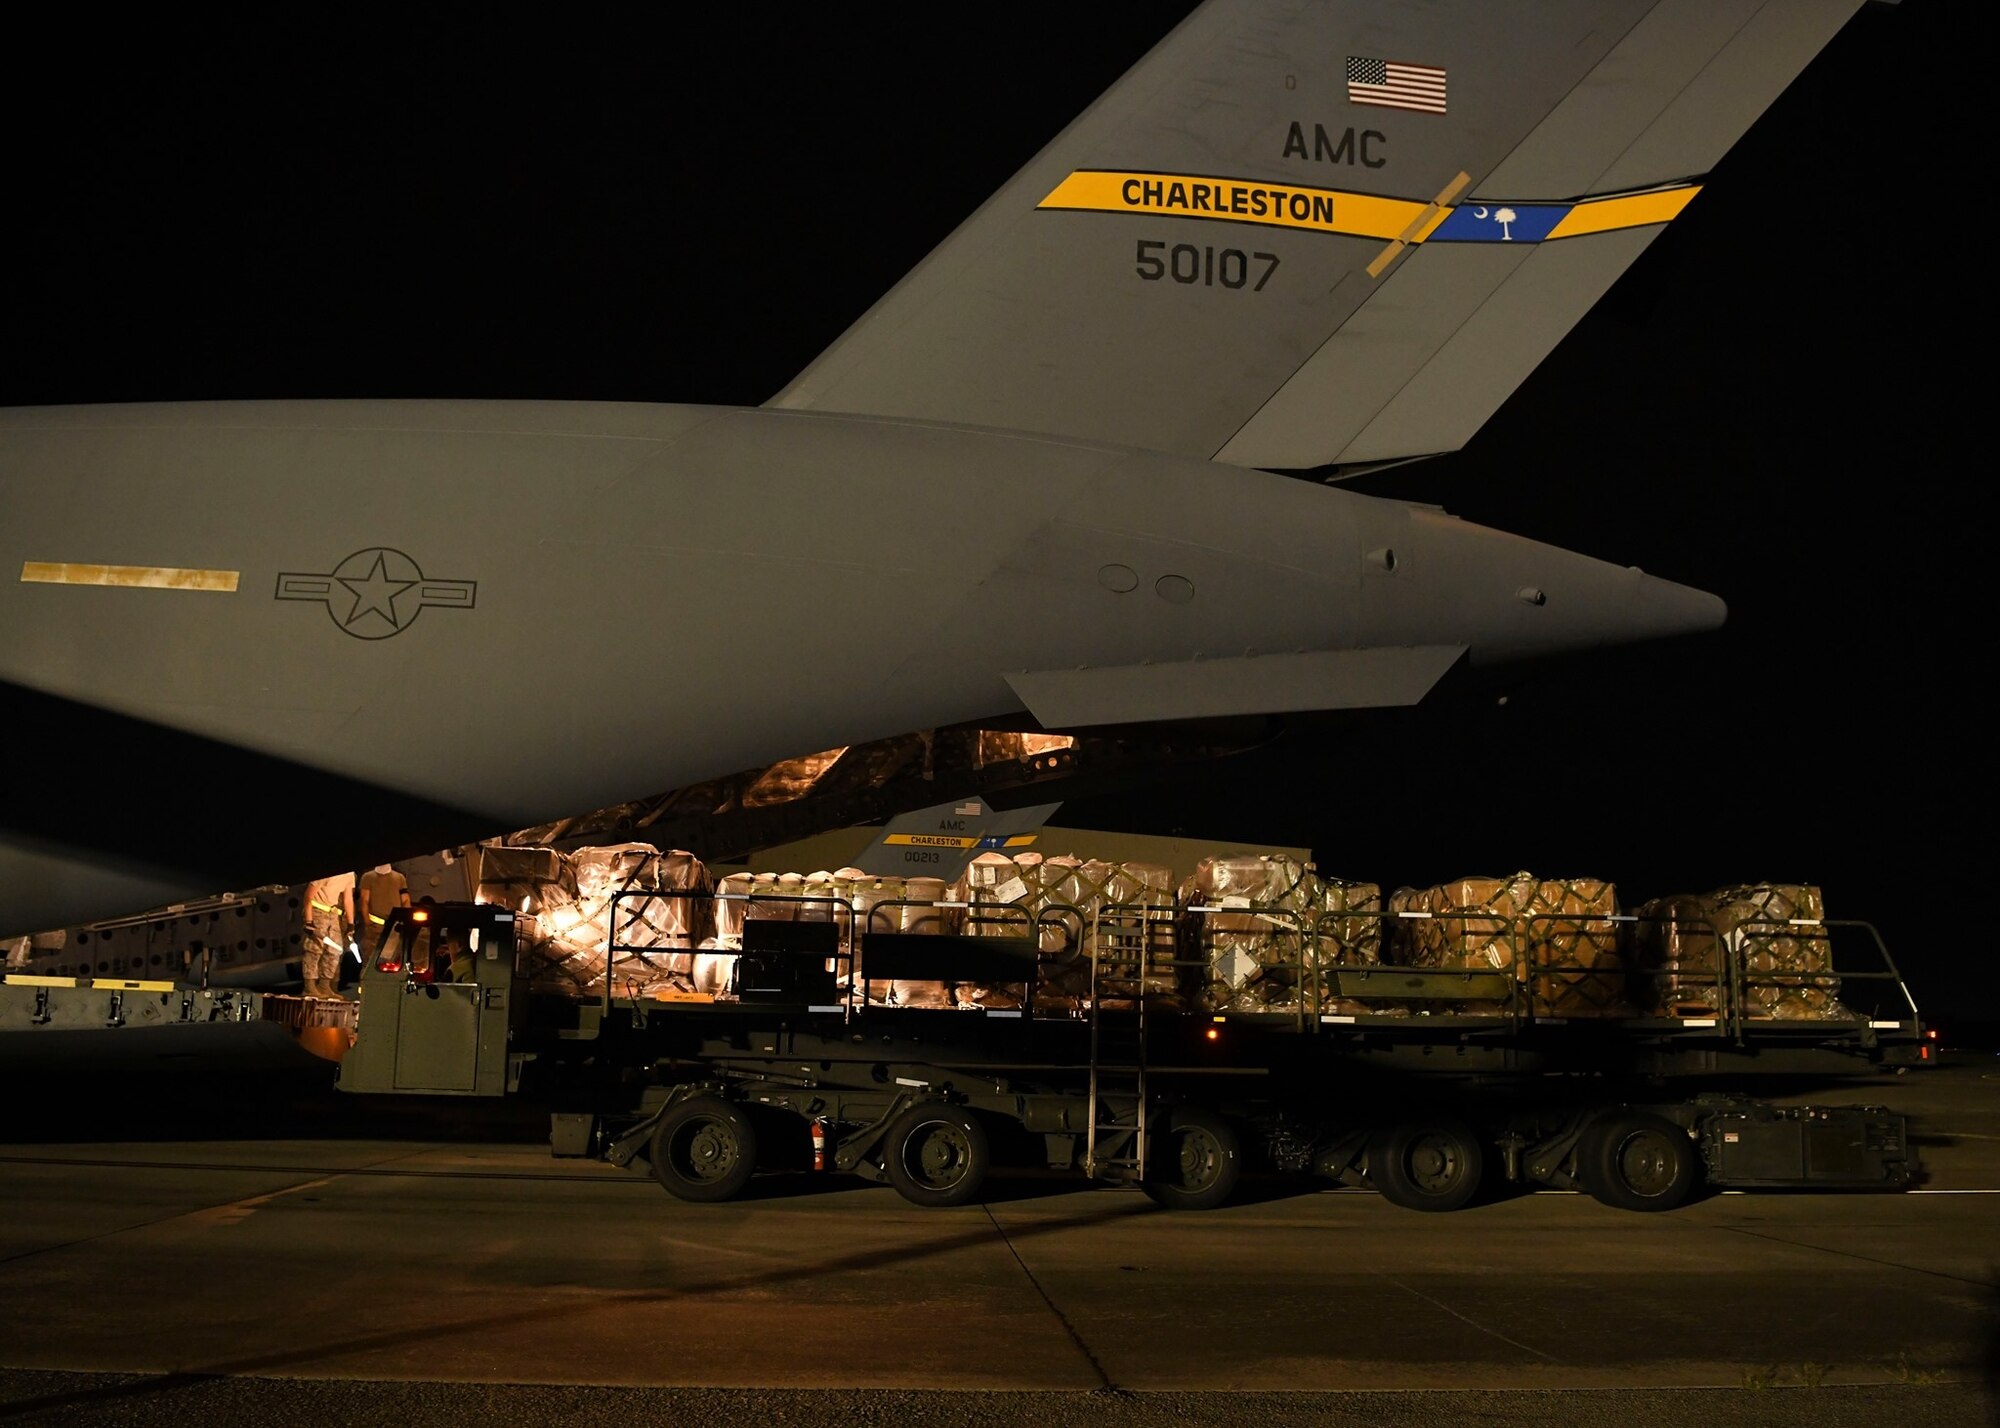 Ramp service technicians assigned to the 437th Aerial Port Squadron load a mobile field hospital onto a C-17 Globemaster III at Joint Base Charleston, S.C., Sept. 19, 2020. Aircrew assigned to the 15th Airlift Squadron transported the large mobile hospital to Kingston, Jamaica, Sept. 19, where it will be used to support the Caribbean nation’s ongoing response to the COVID-19 pandemic. The donation, made on behalf of the American people, cost $753,000 and is part of U.S. Southern Command’s ongoing assistance to nations responding to the global pandemic in the Caribbean and Latin America funded by the command’s Humanitarian Assistance Program (HAP). The command has also delivered mobile field hospitals to Costa Rica and the Dominican Republic and, in total, will donate 24 field hospitals to 11 countries. (Photo by Staff Sergeant Lance Valencia)